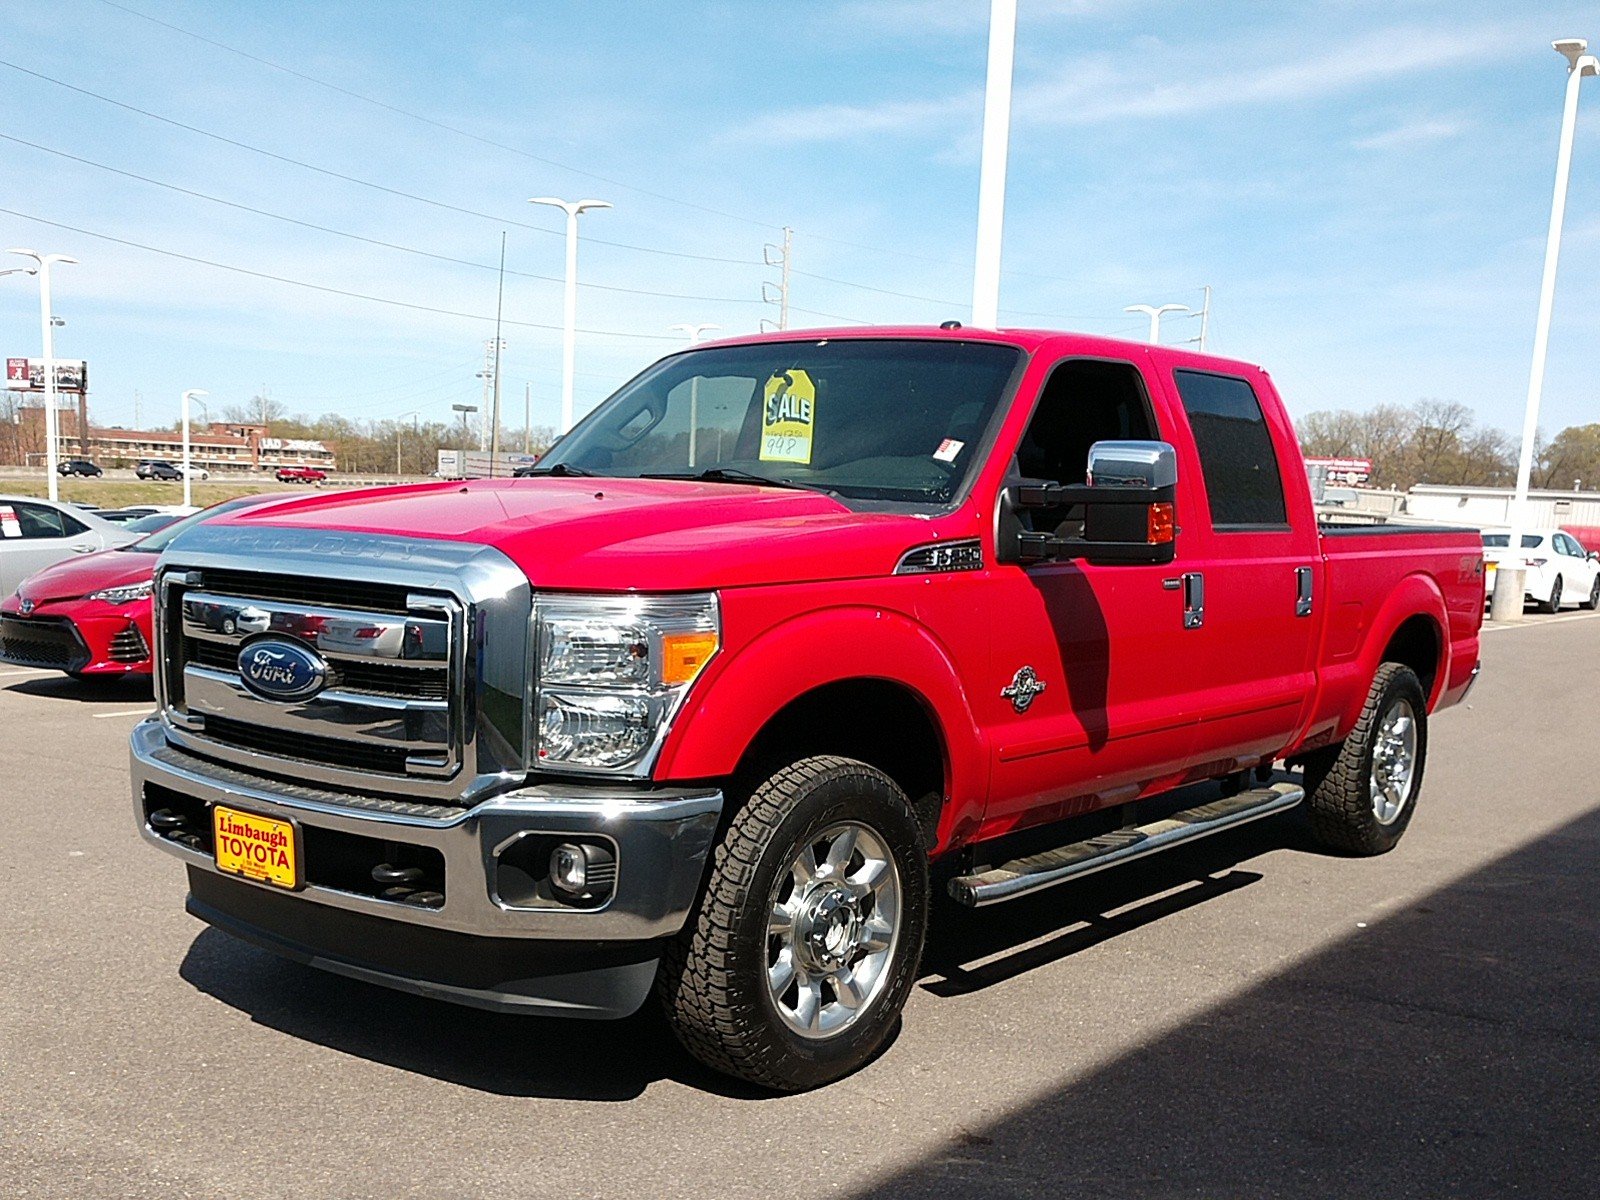 Pre-Owned 2015 Ford Super Duty F-250 SRW Lariat Crew Cab Pickup in